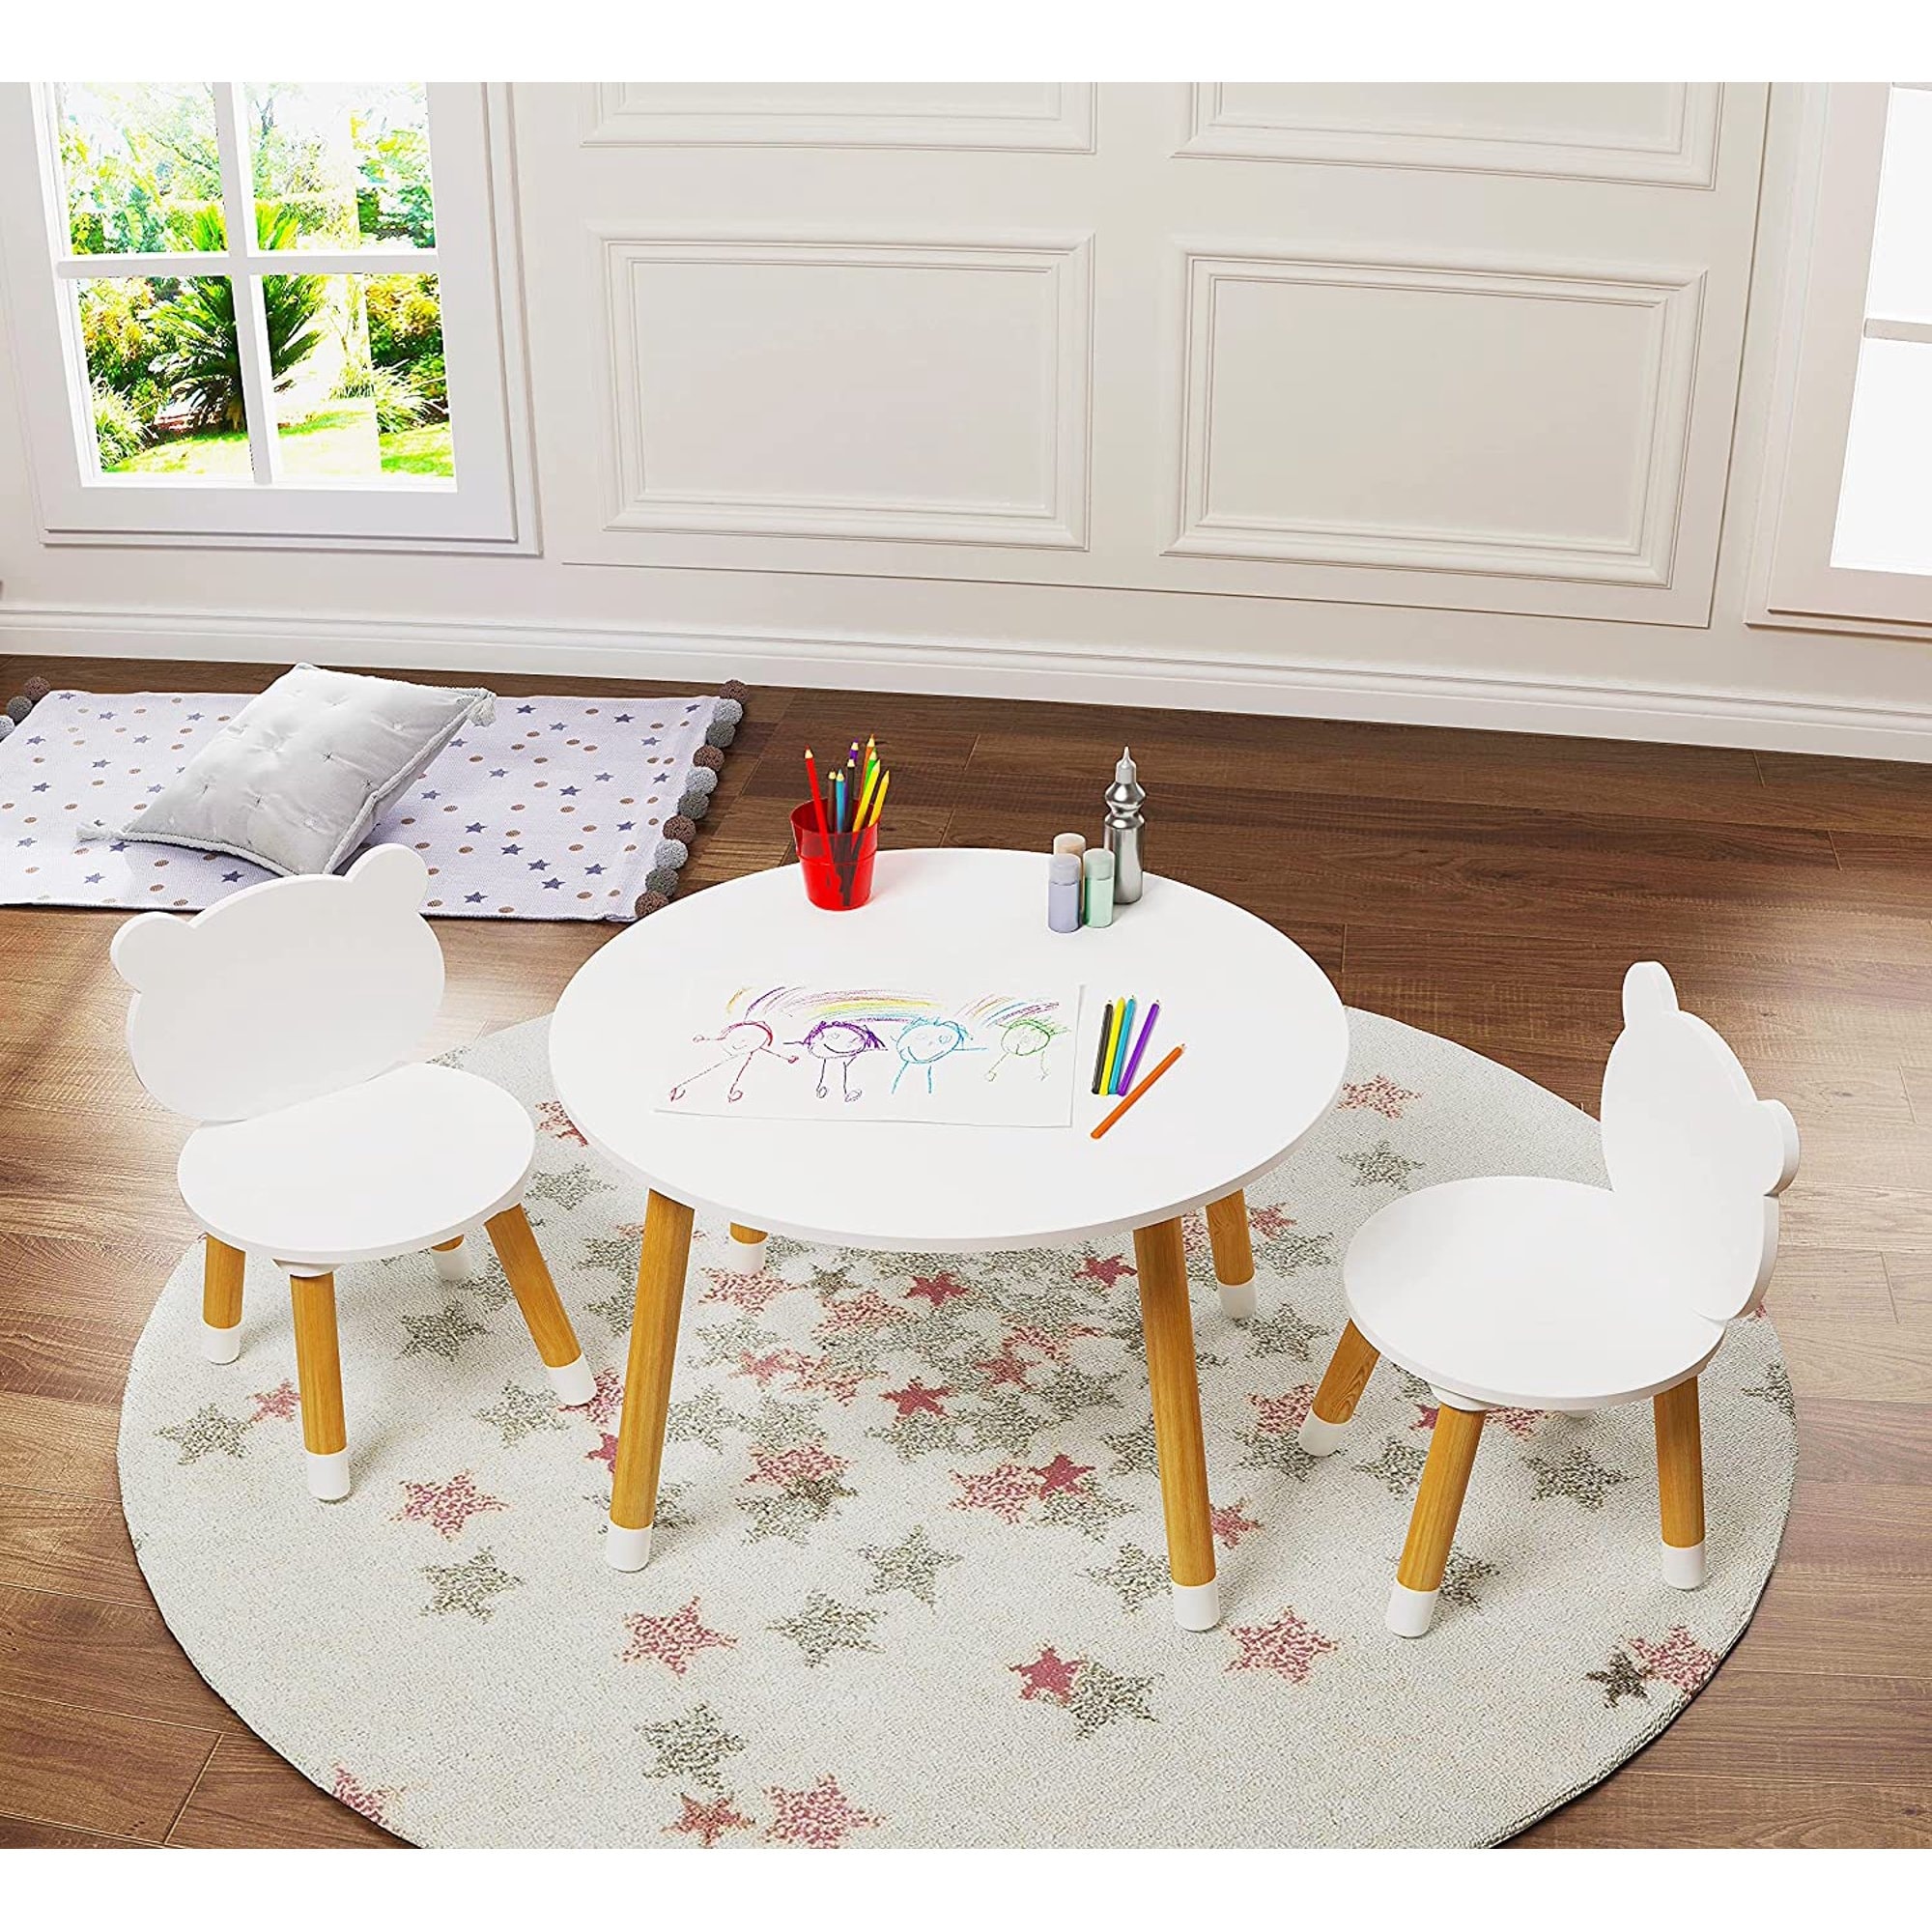 Utex Kids Table and Chair Sets - Bed Bath & Beyond